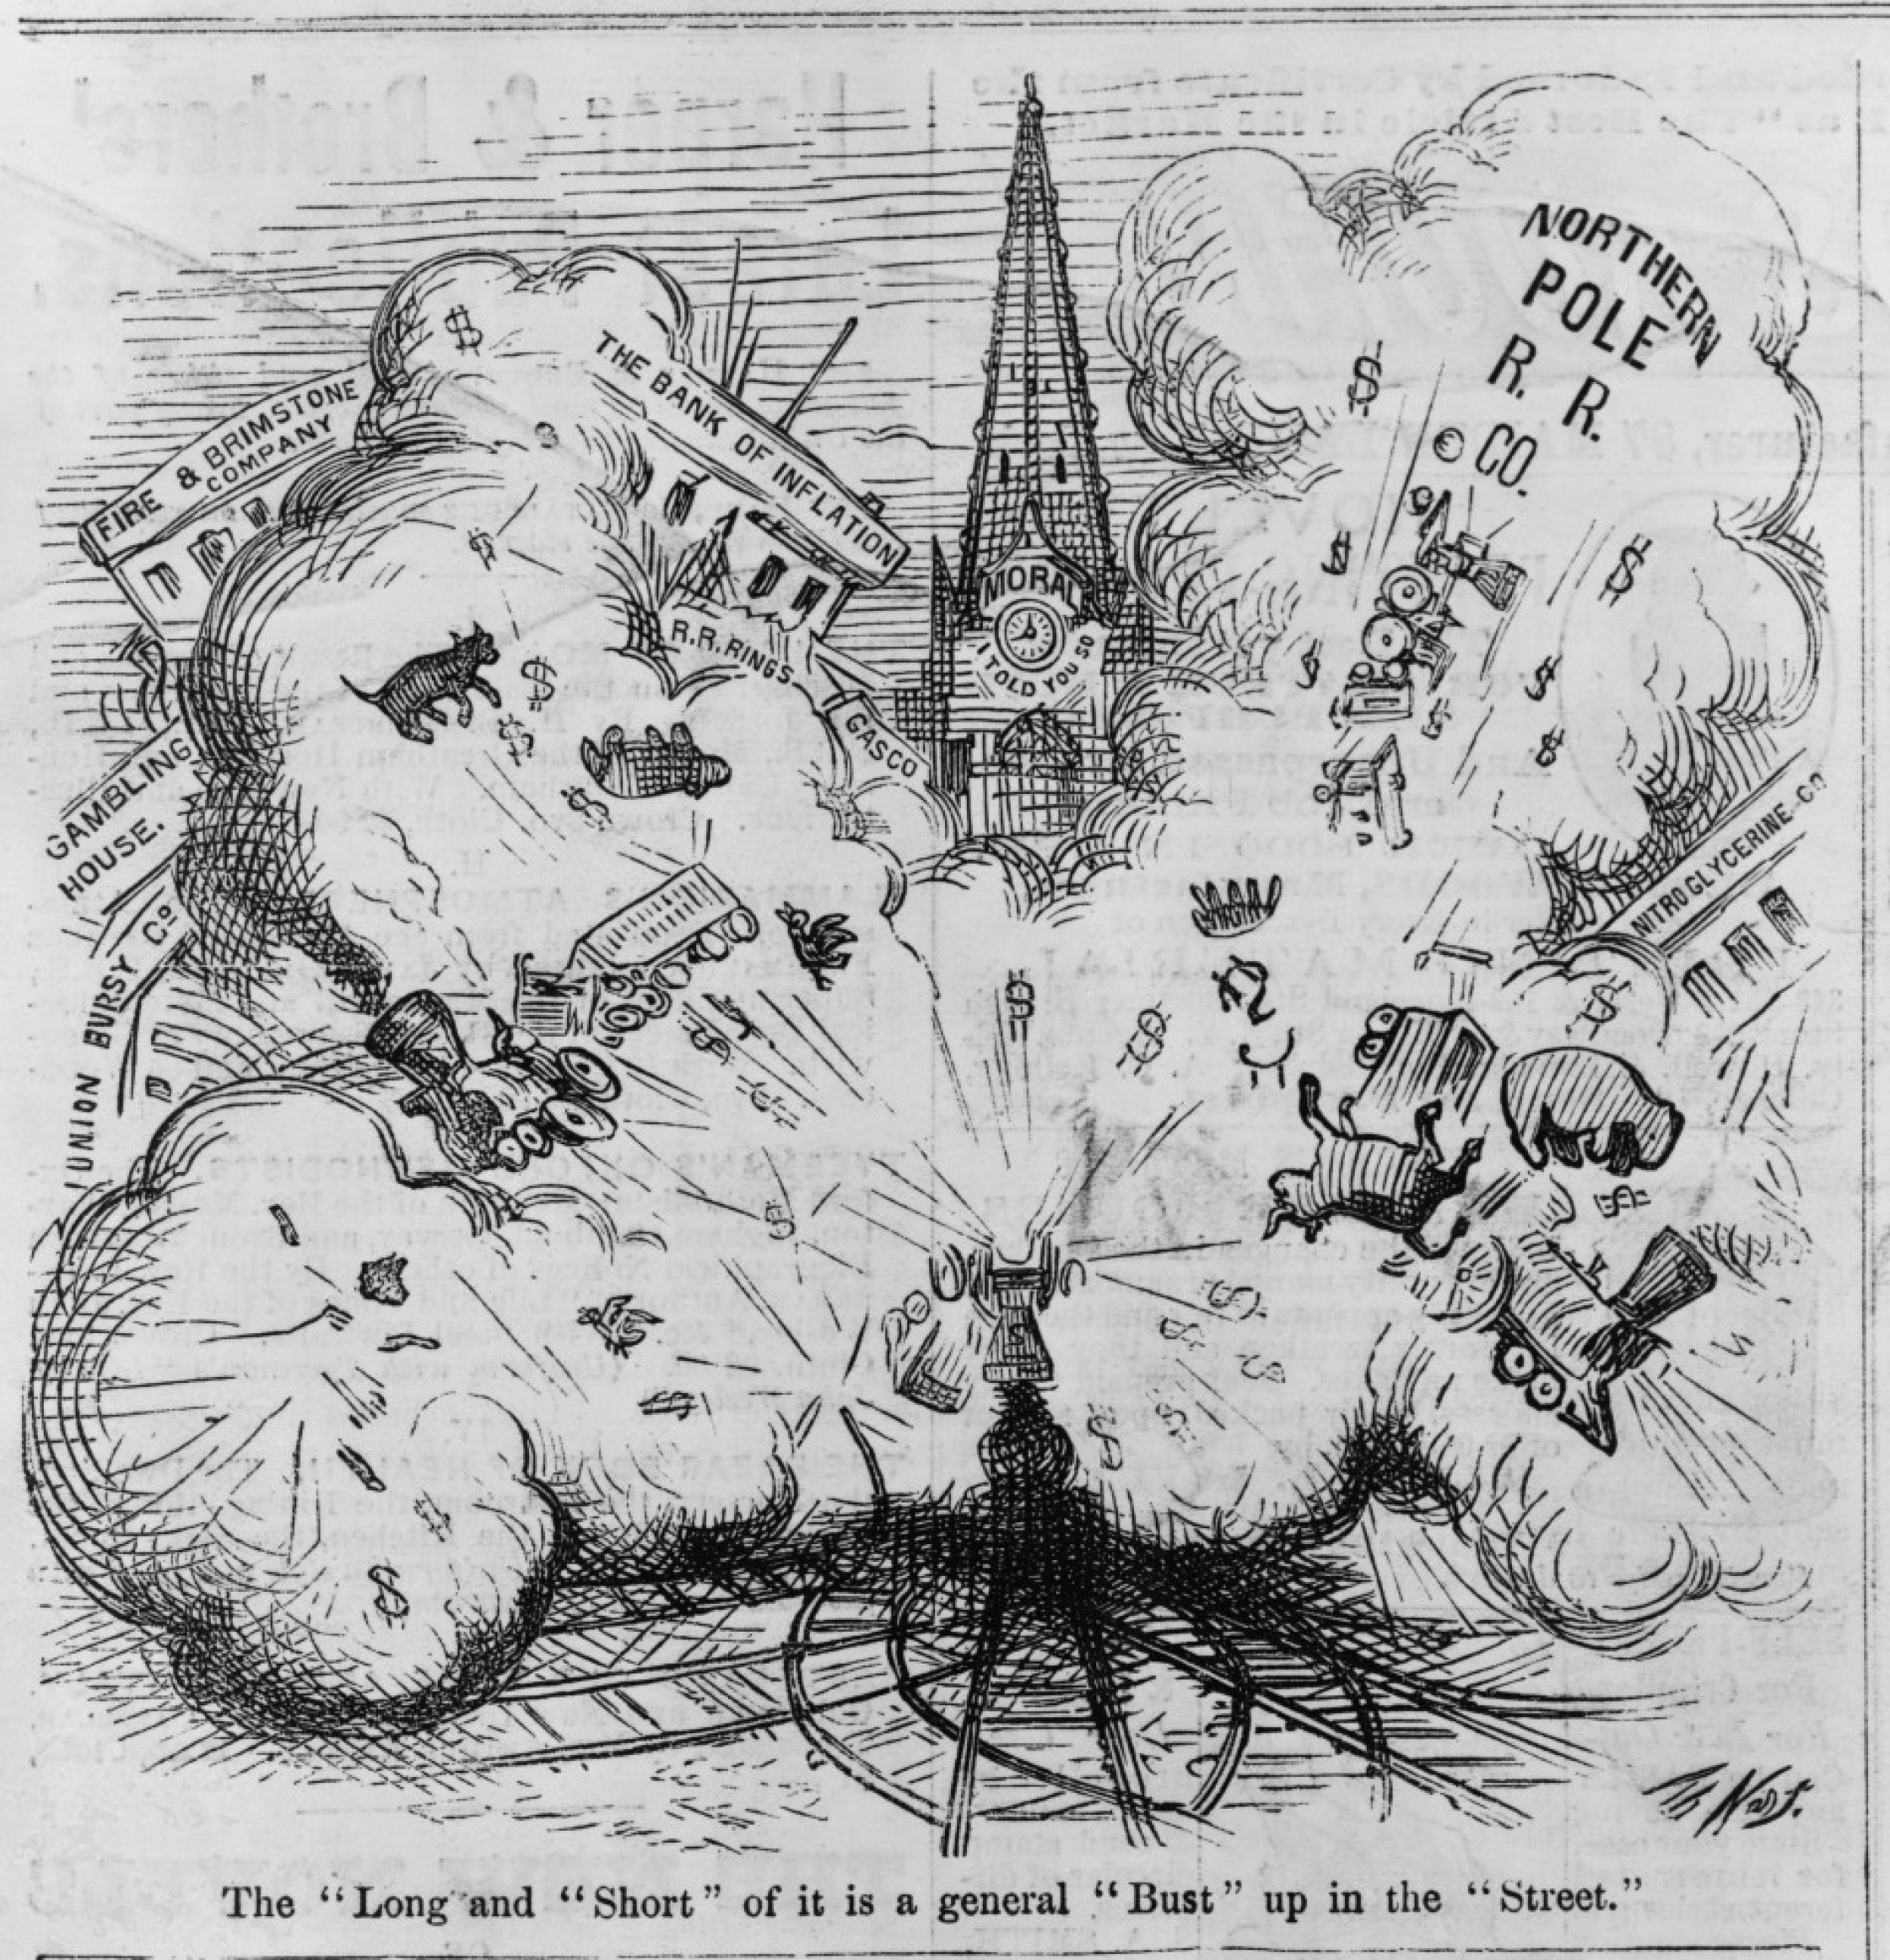 Wall Street representations in newspaper cartoons and illustrations were common around the time of the Panic of 1873, but financiers were seen as victims of the man-made calamity that was laissez-faire industrial capitalism. An 1873 cartoon by Thomas Nast